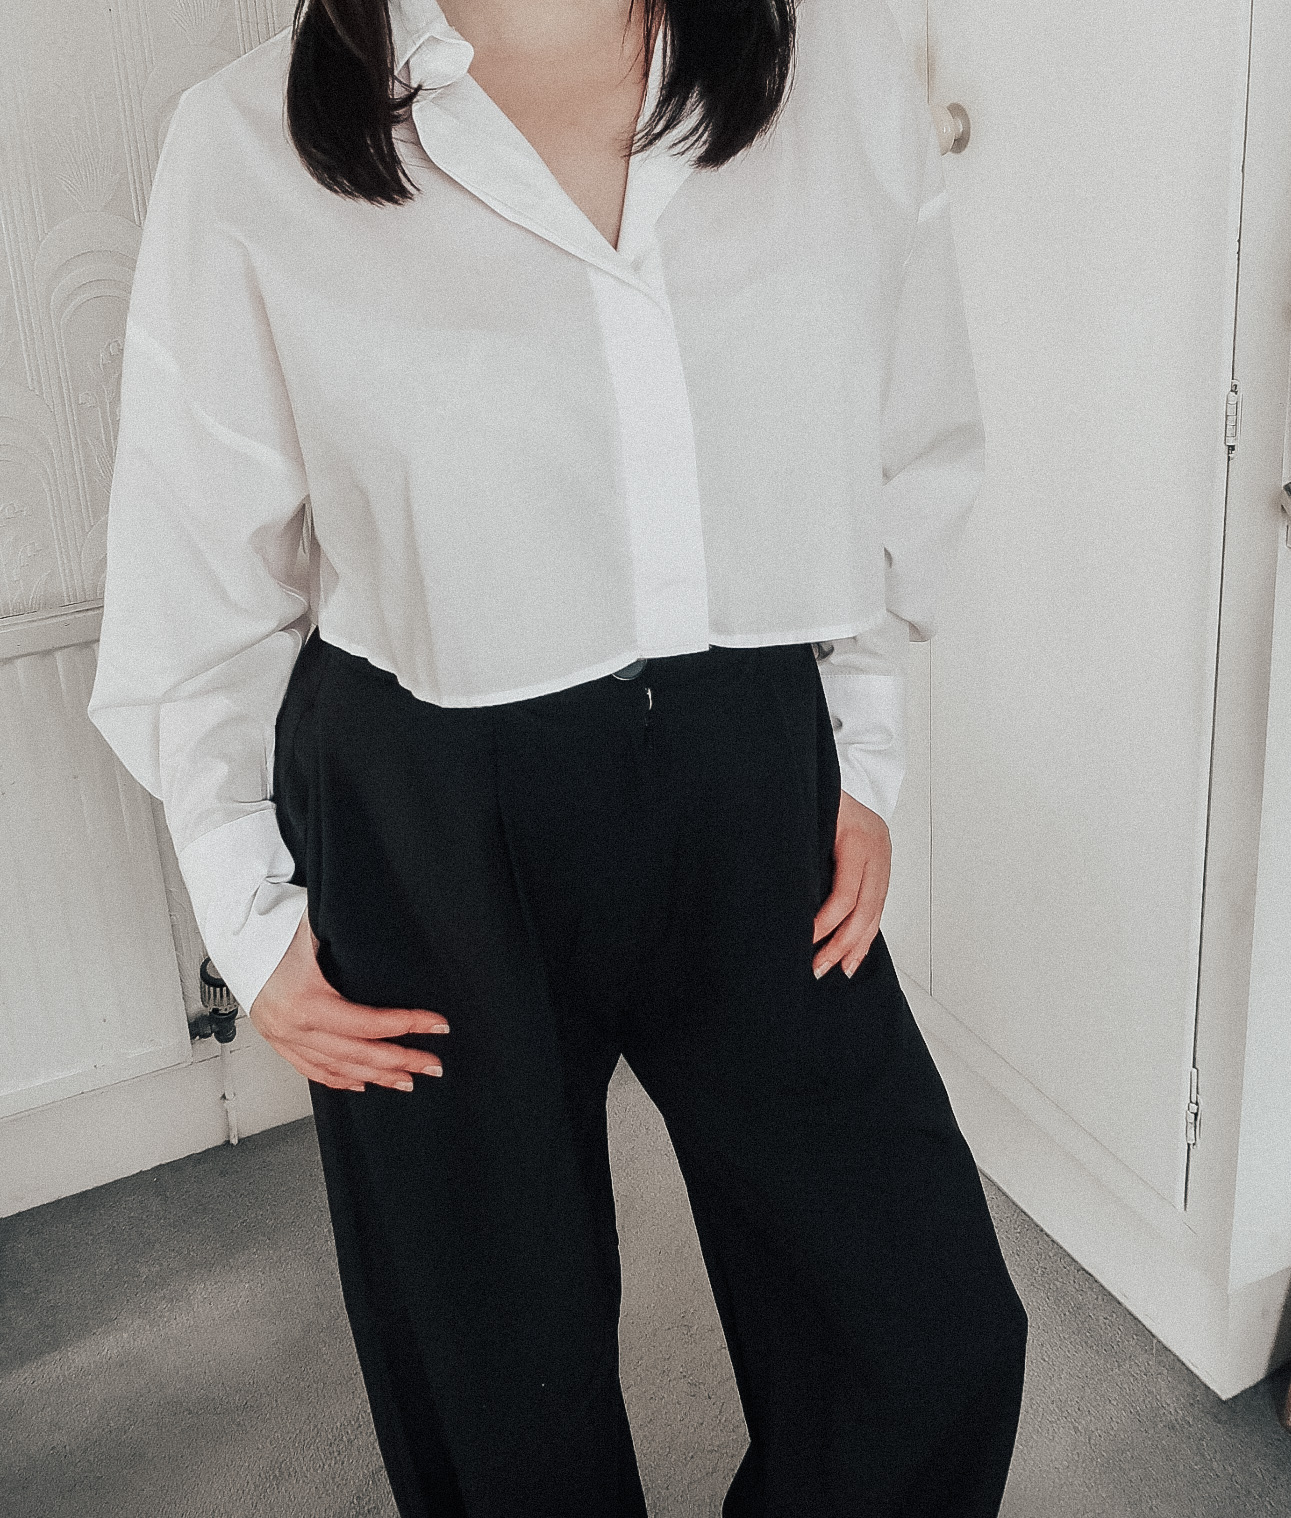 Black Trousers: 7 Fashionable Outfit Ideas For Any Occasion - Lucy Mary